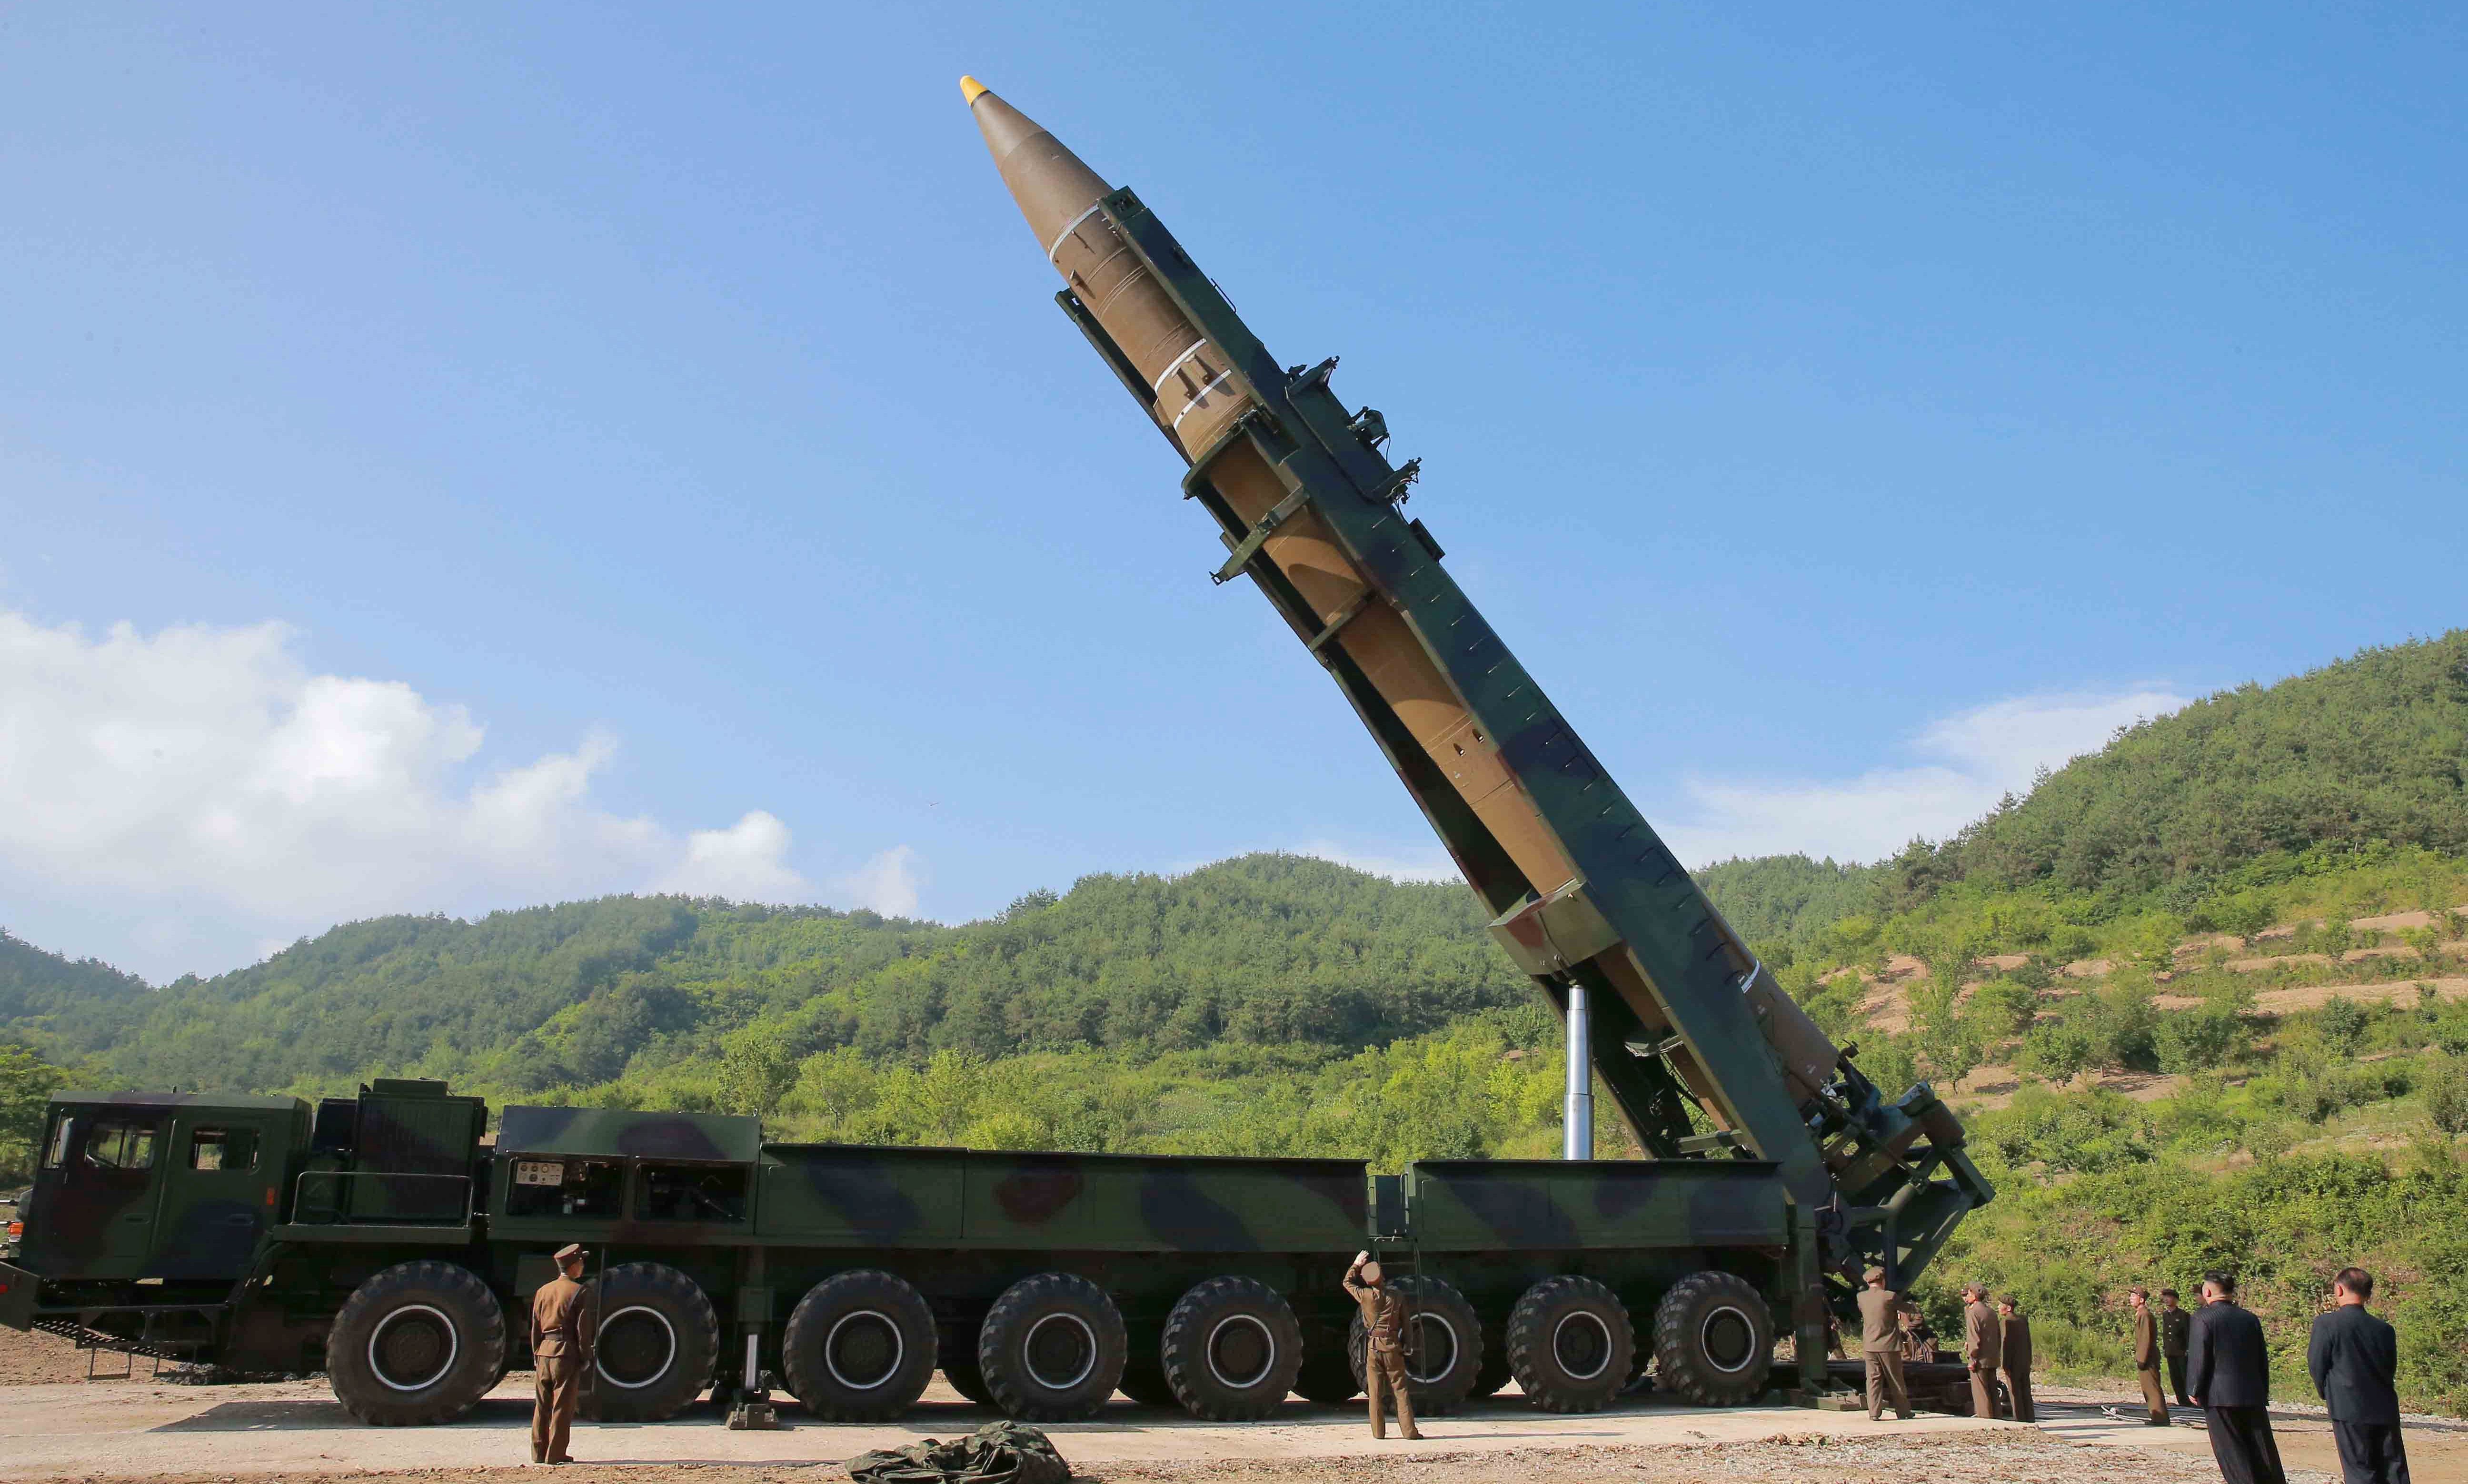 epa06169199 (FILE) - A photo made available by the North Korean Central News Agency (KCNA), the state news agency of North Korea, shows  the North Korean inter-continental ballistic rocket Hwasong-14 being prepared before a test launch at an undisclosed location in North Korea, 04 July 2017. Media reports on 28 August 2017 state that North Korea has launched a missile and the Japanese Government warns it is headed towards northern Japan.  EPA/KCNA